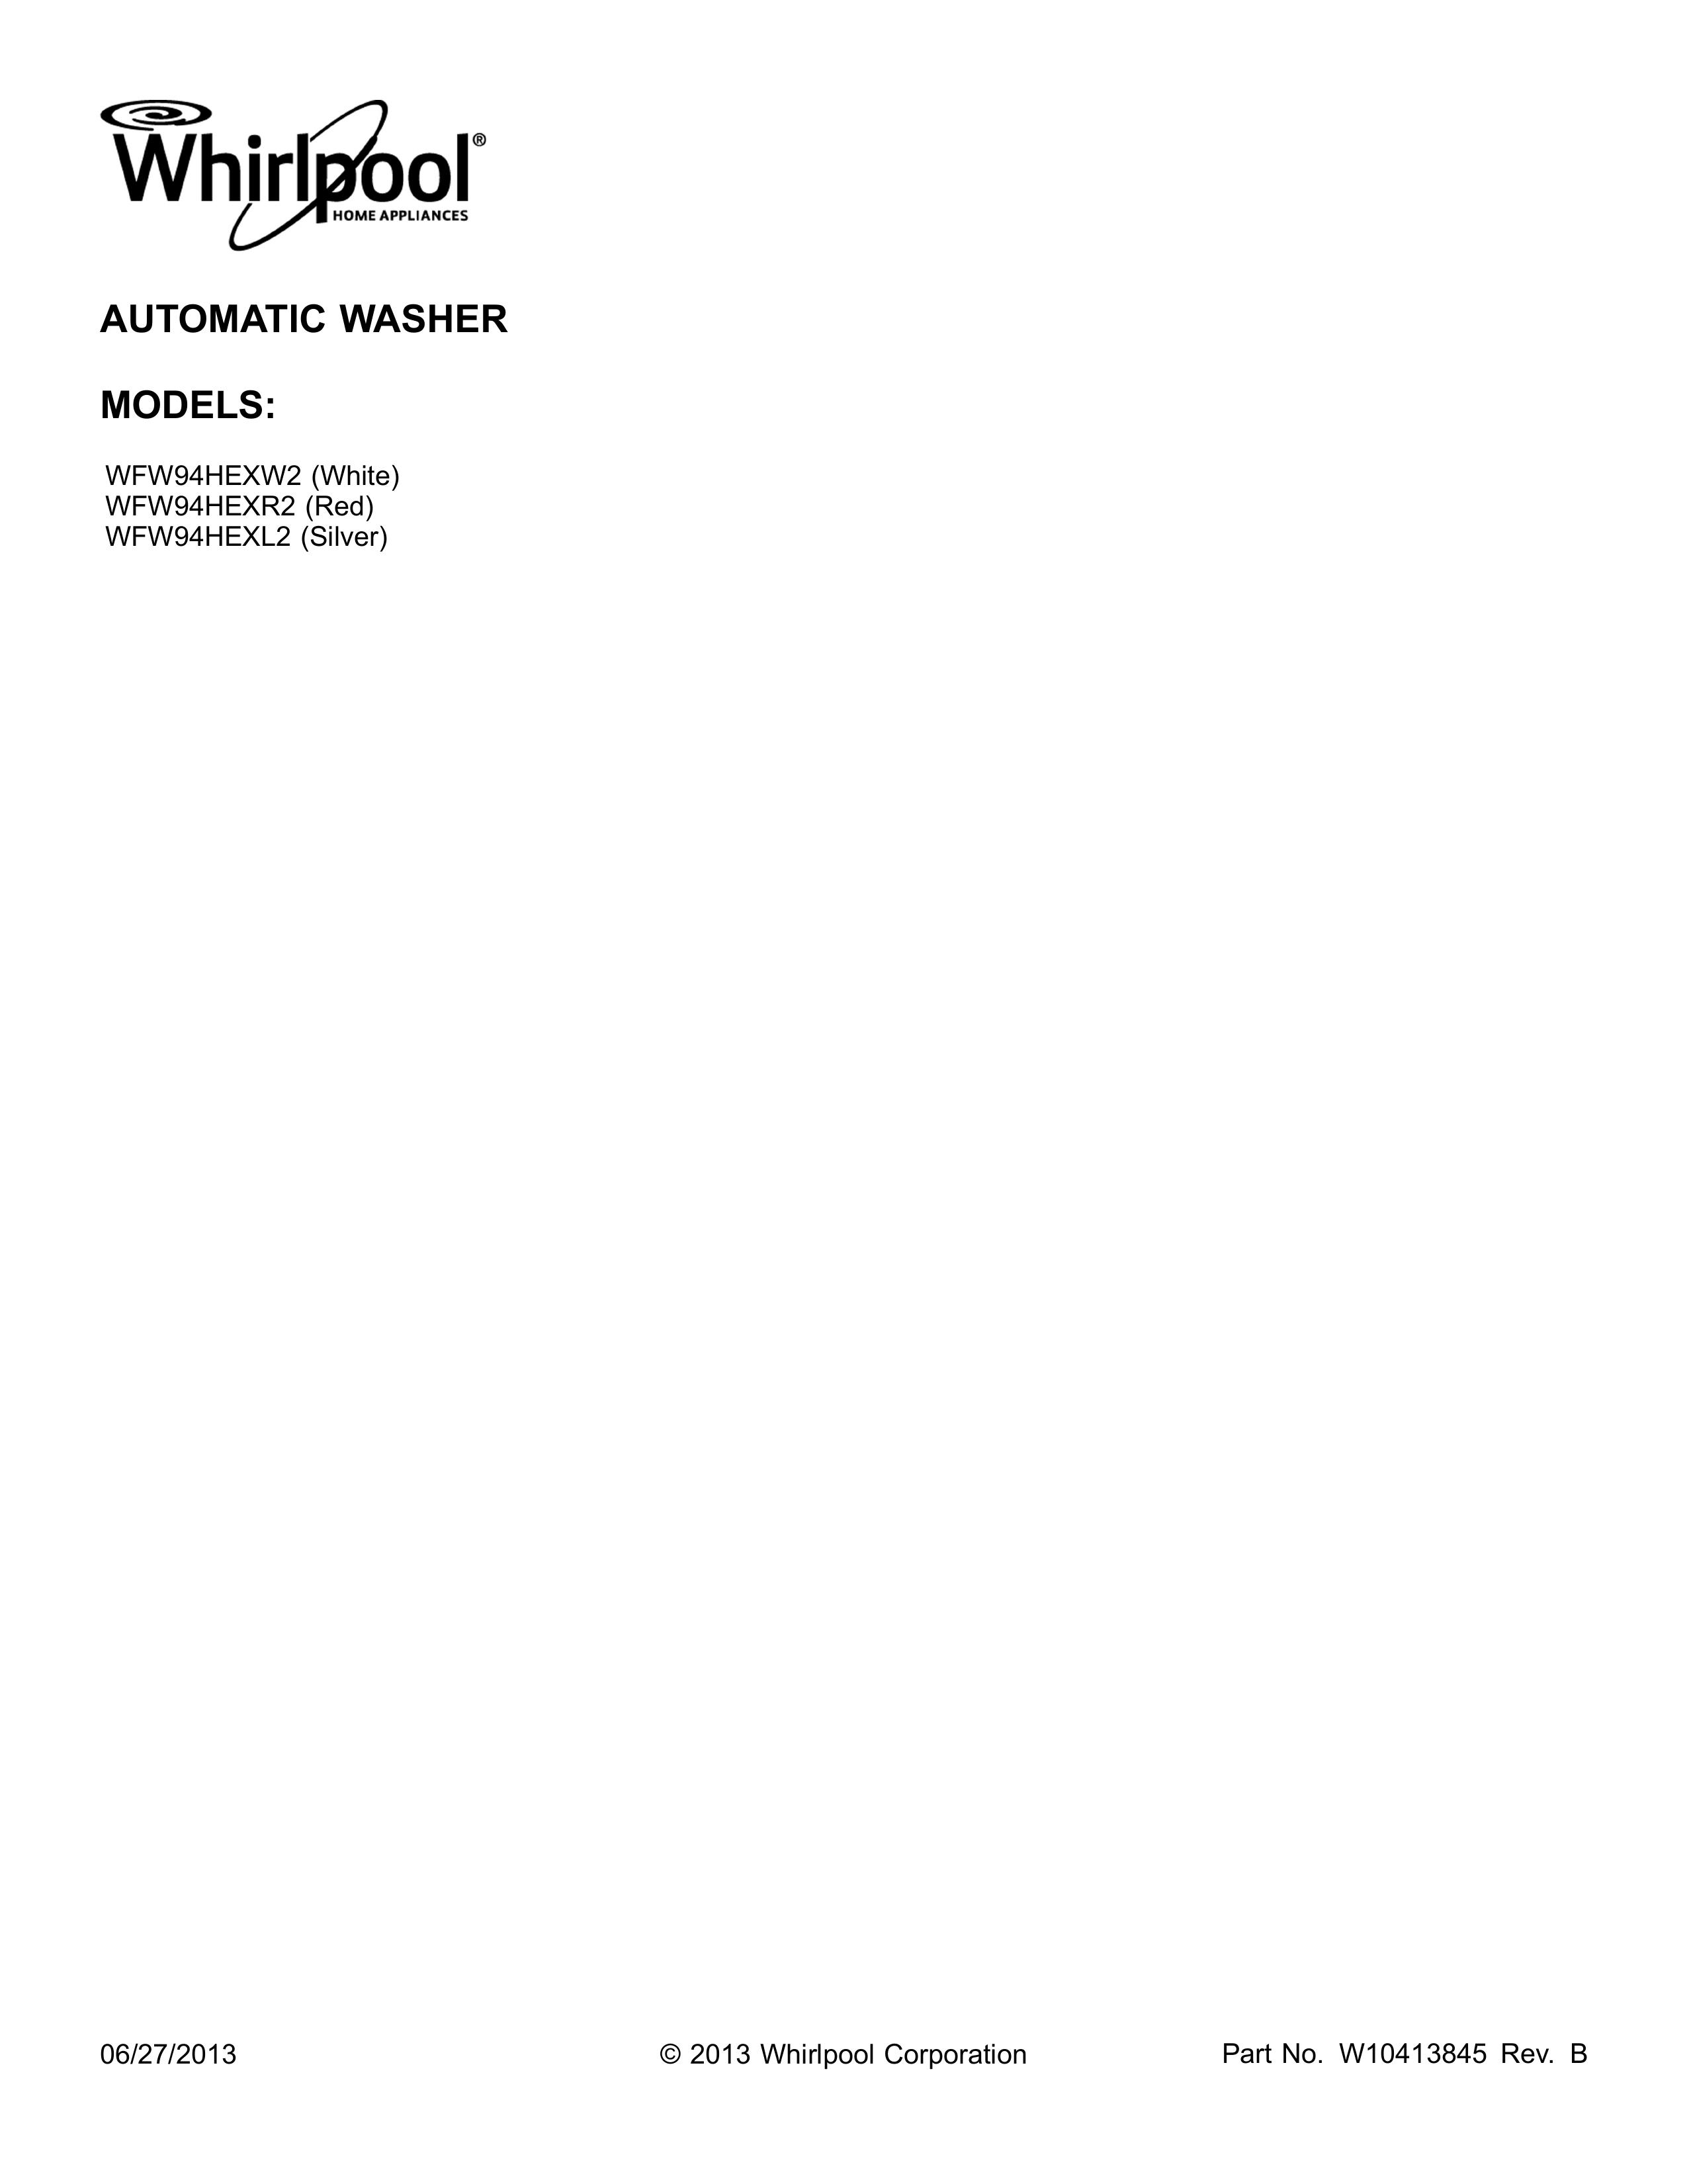 Whirlpool WFW94HEXW2 Pressure Washer User Manual